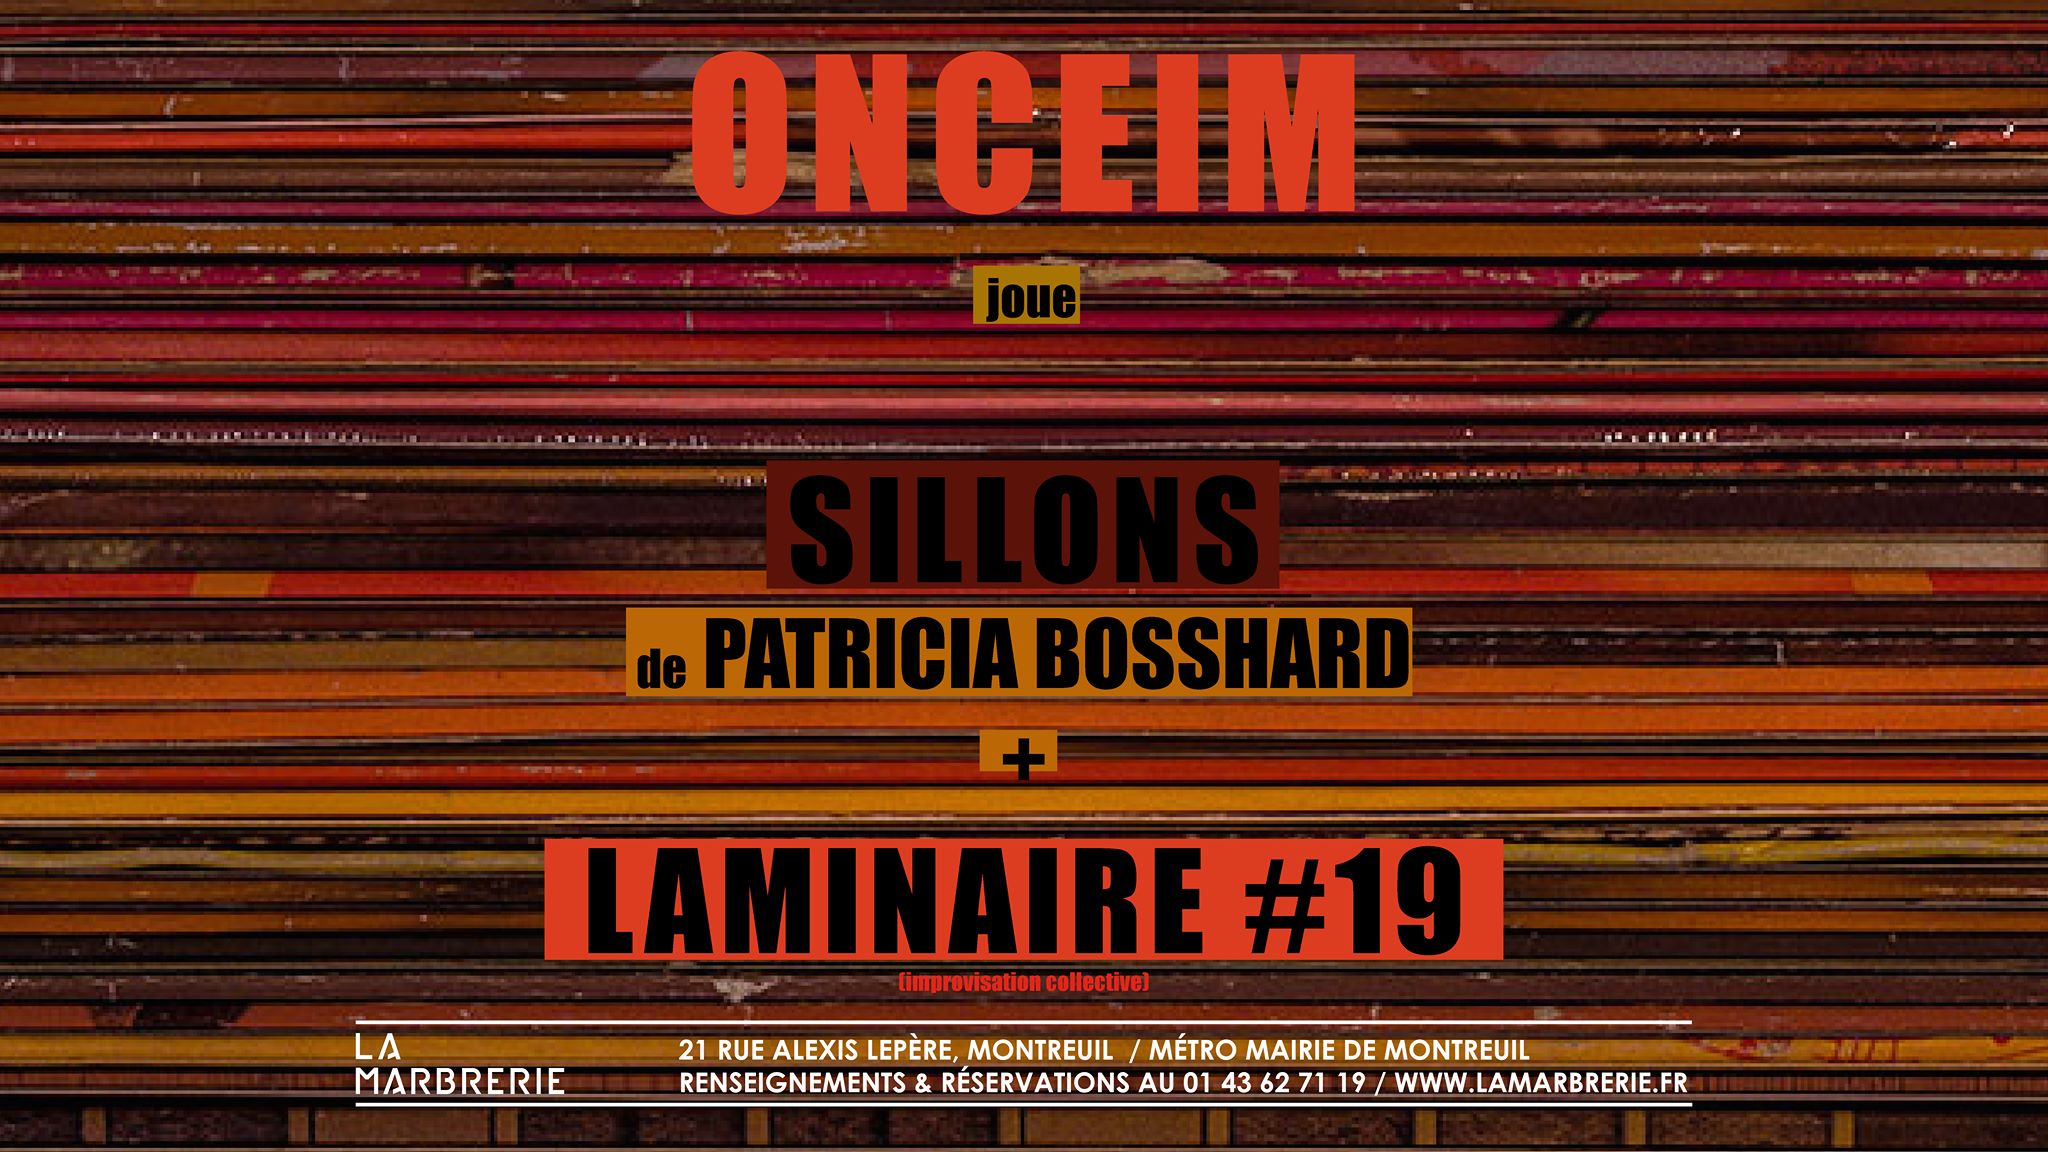 onceim-sillons-patricia-bosshard-laminaire19